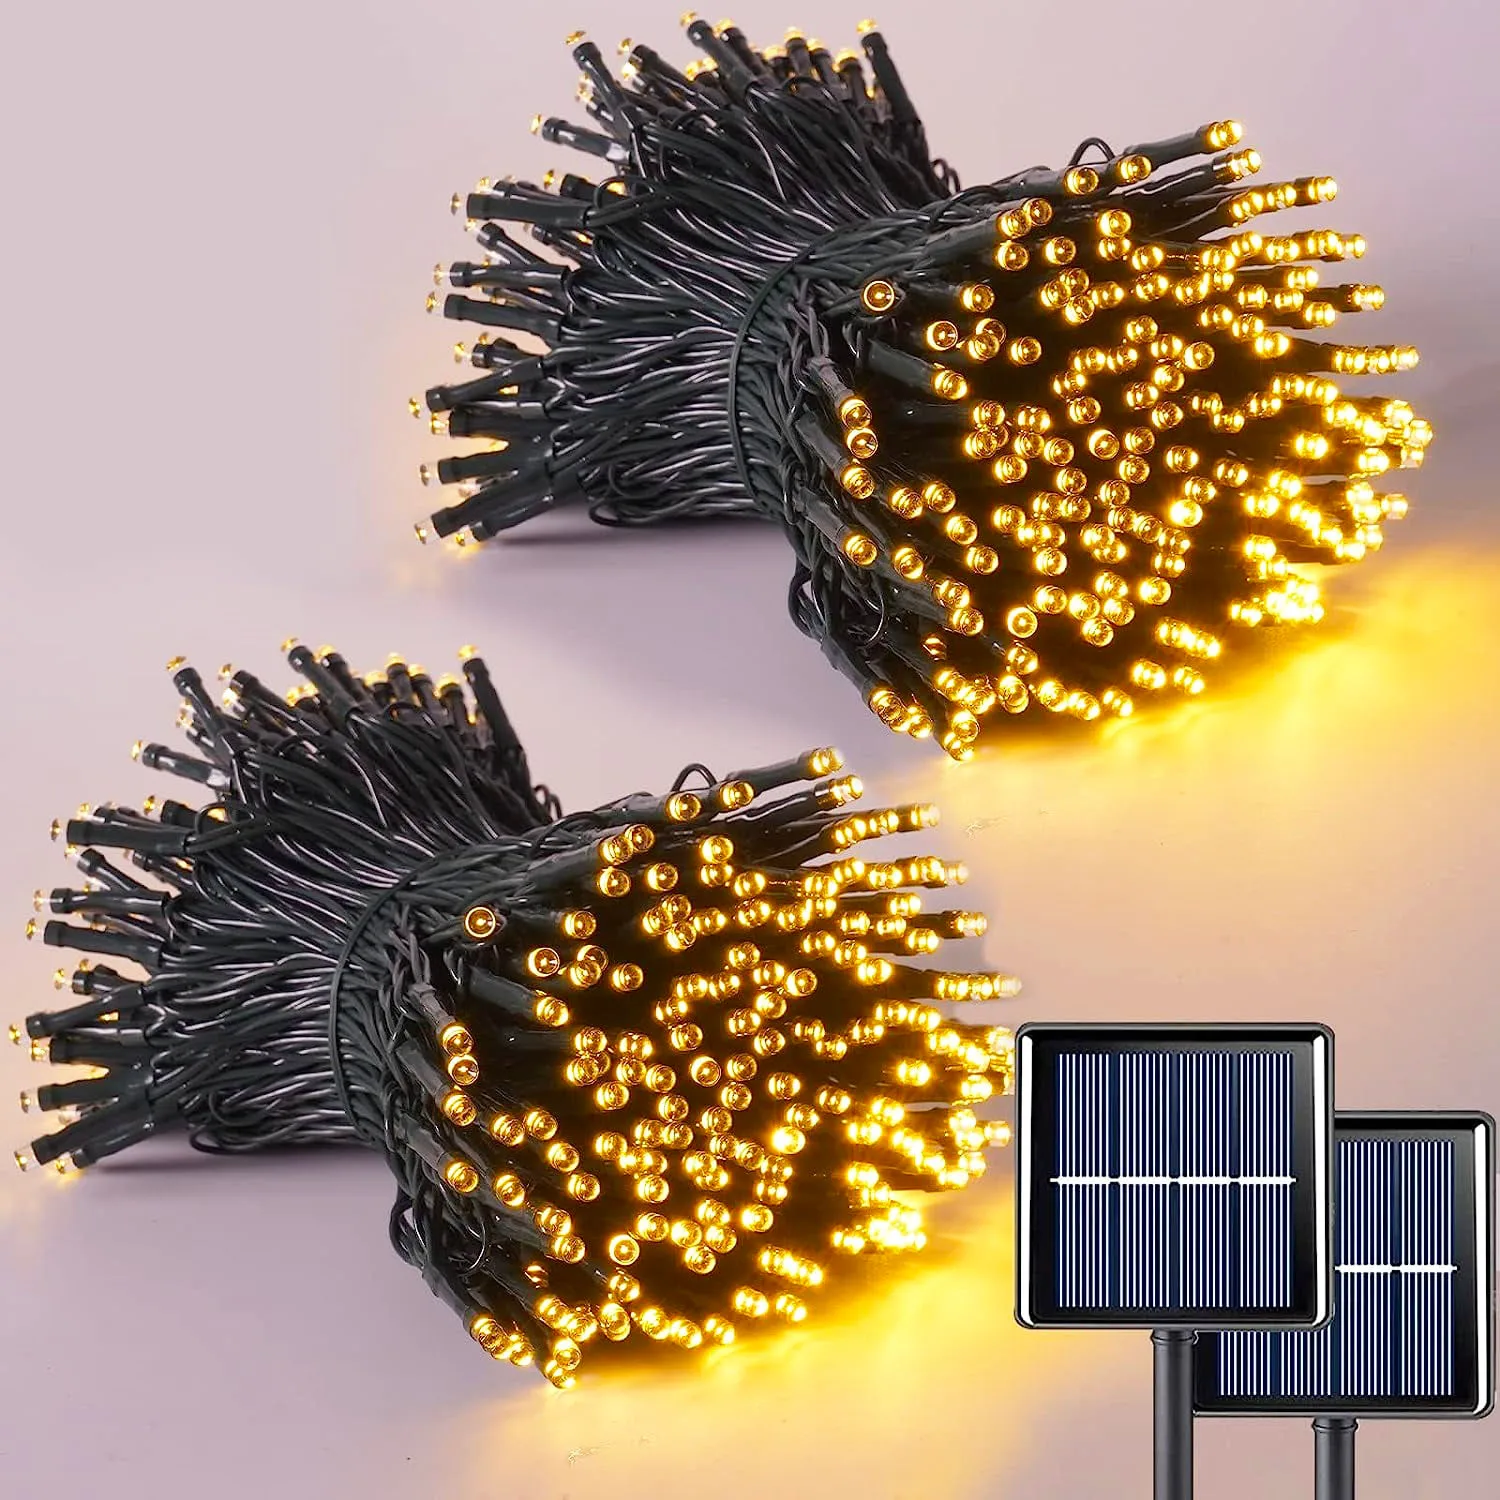 2Pack Solar String Lights Outdoor Waterproof Fairy Christmas Twinkle Lights with 8 Modes Tree Lights for Outdoor Garden Patio patio furniture set outdoor conversation textilene fabric chairs for lawn garden balcony poolside with a glass coffee table